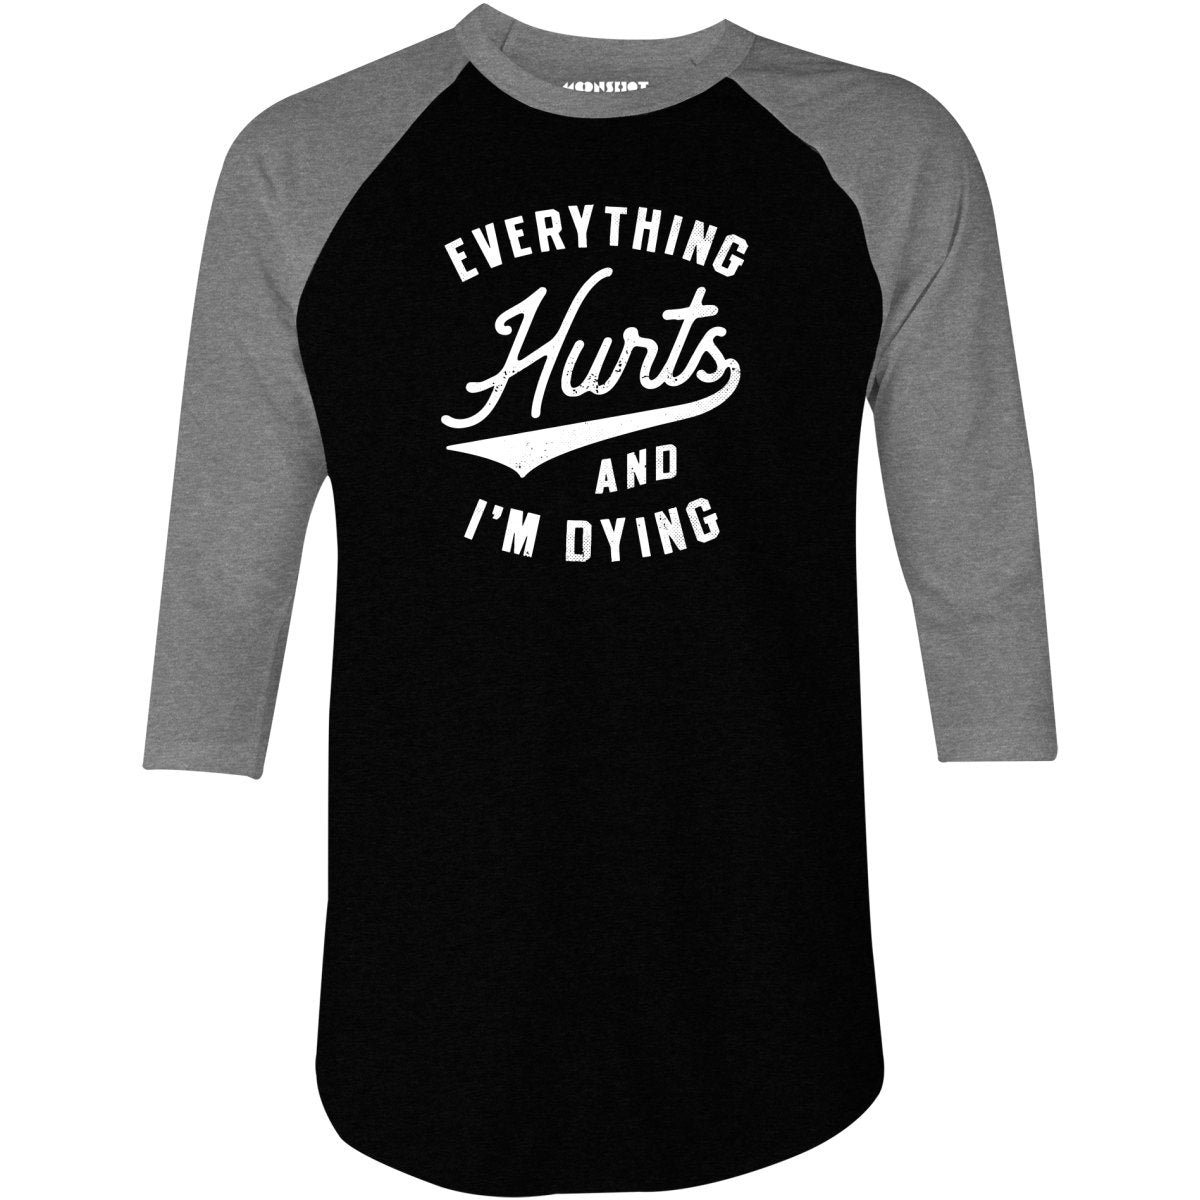 Everything Hurts and I'm Dying - 3/4 Sleeve Raglan T-Shirt